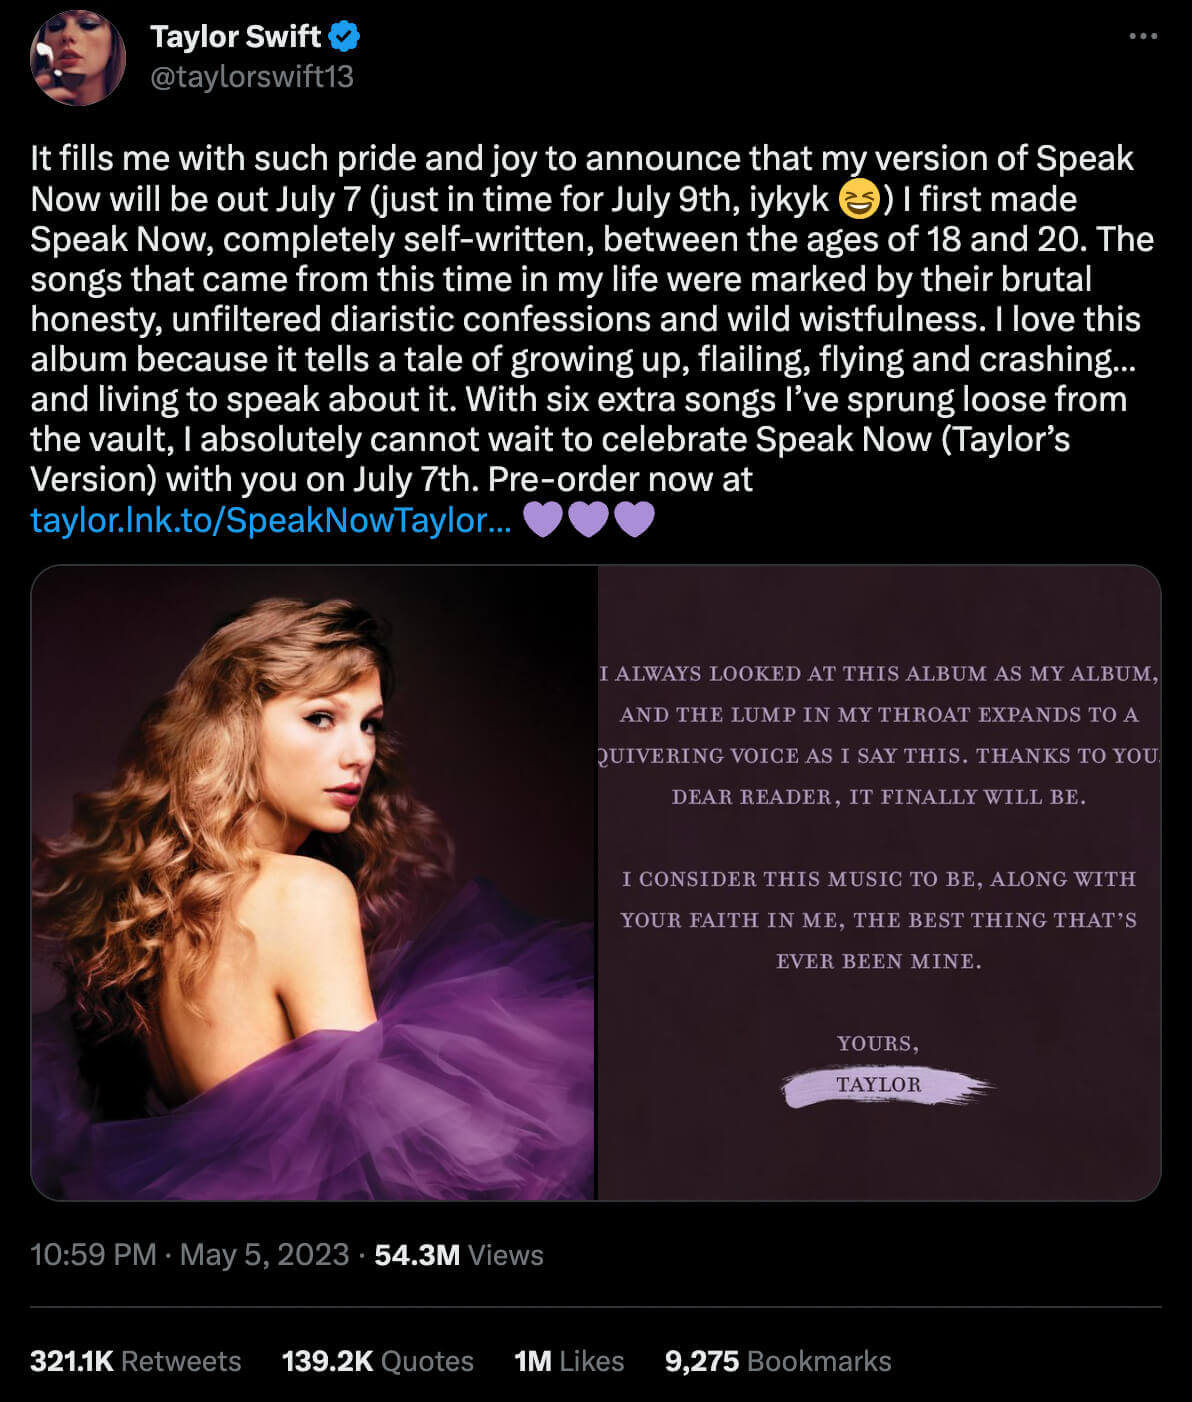 Taylor Swift using IYKYK in a tweet to reference the July 9th date mentioned in her "Last Kiss" song